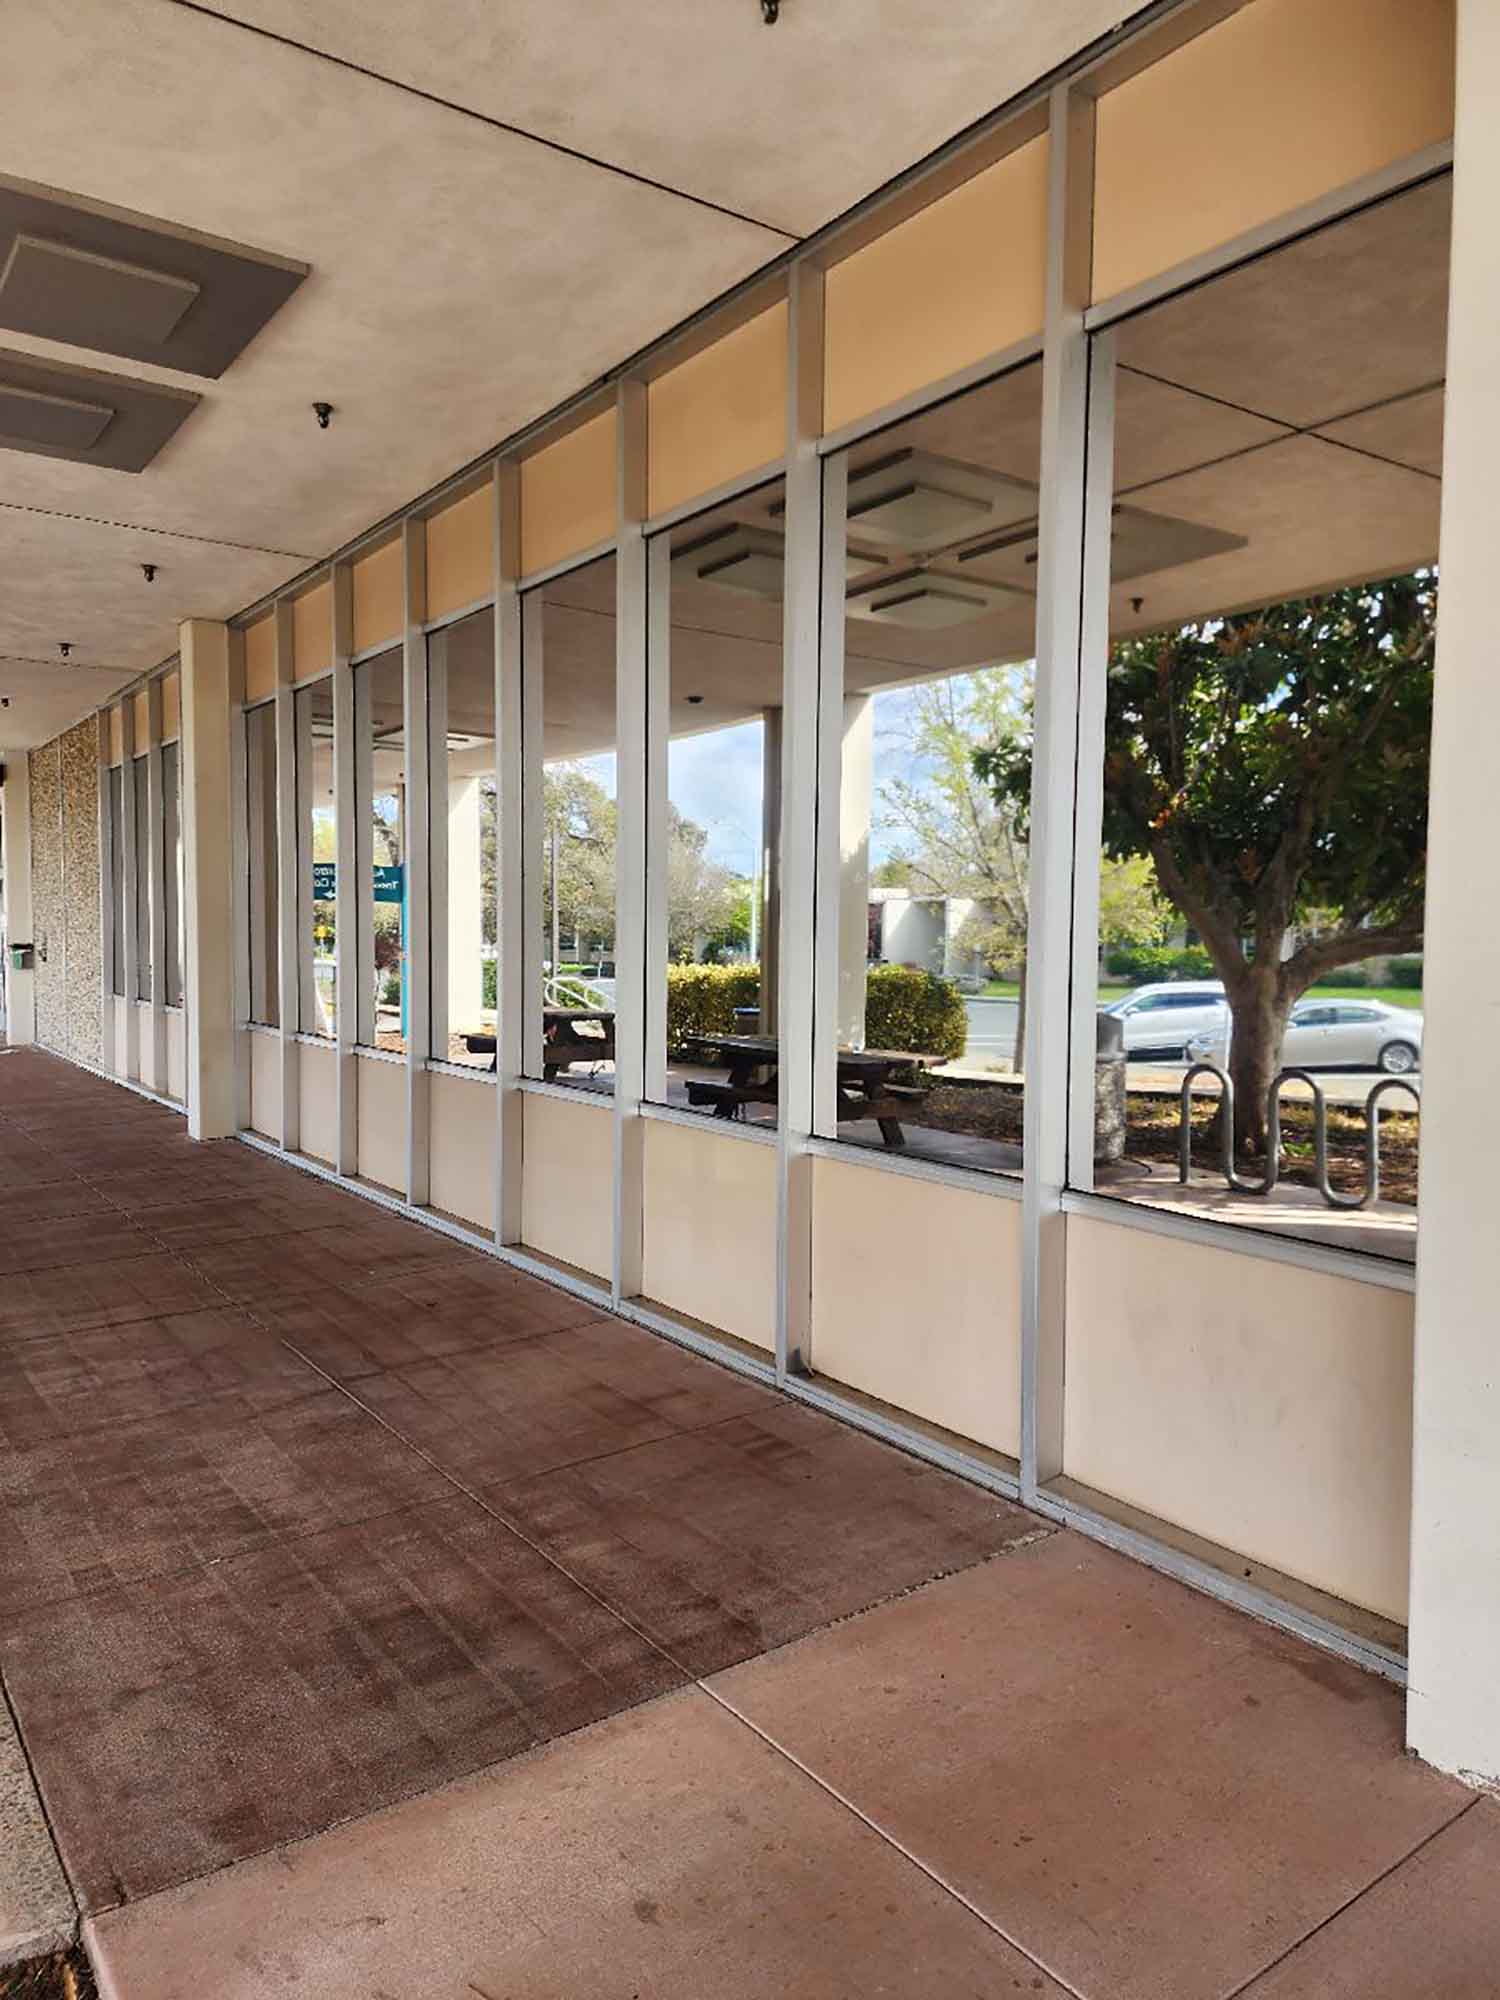 ClimatePro Installs Privacy and Sun Control Window Tint for a Santa Rosa, CA Office